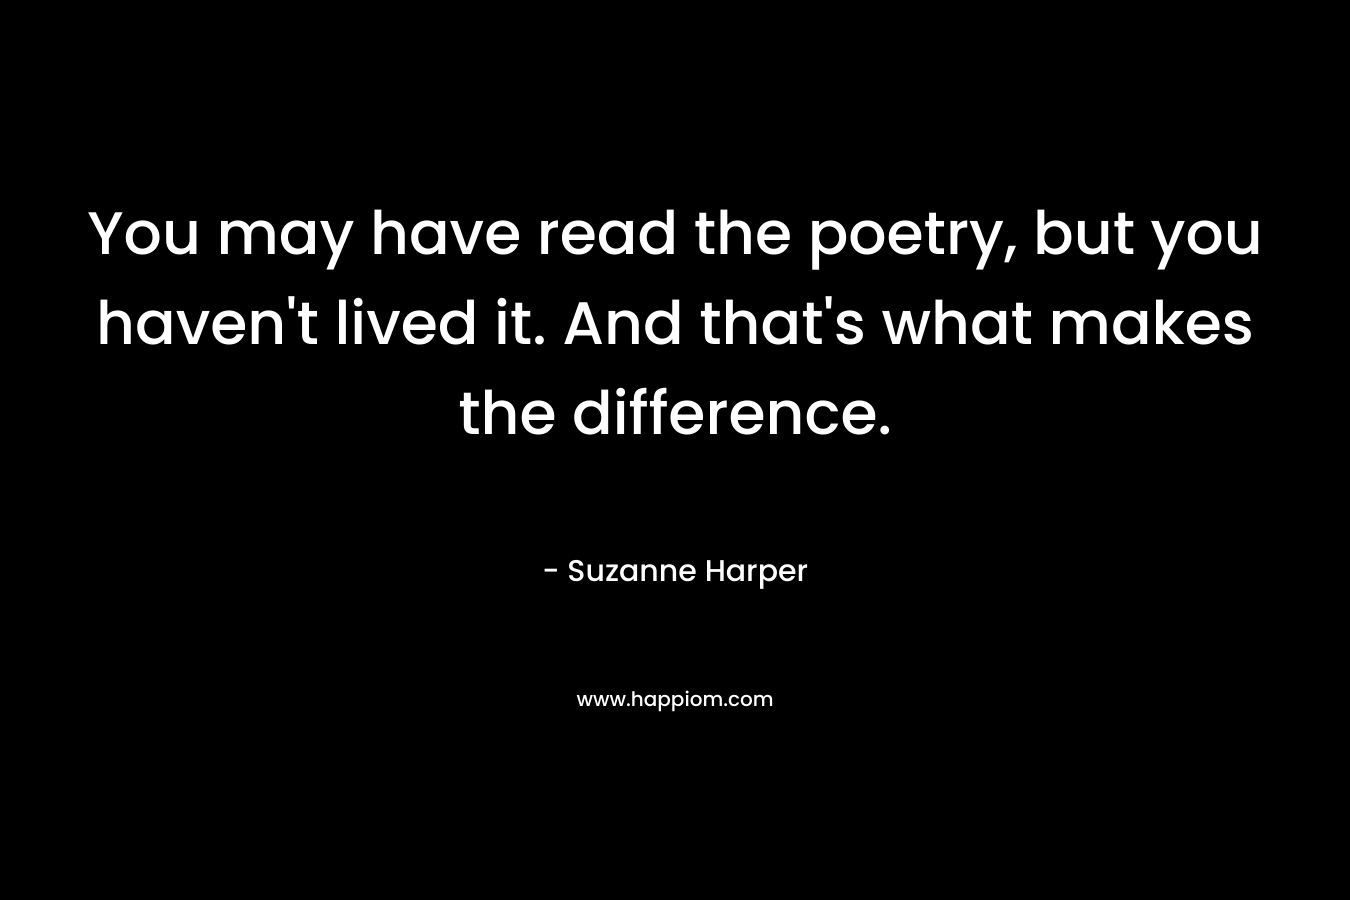 You may have read the poetry, but you haven't lived it. And that's what makes the difference.